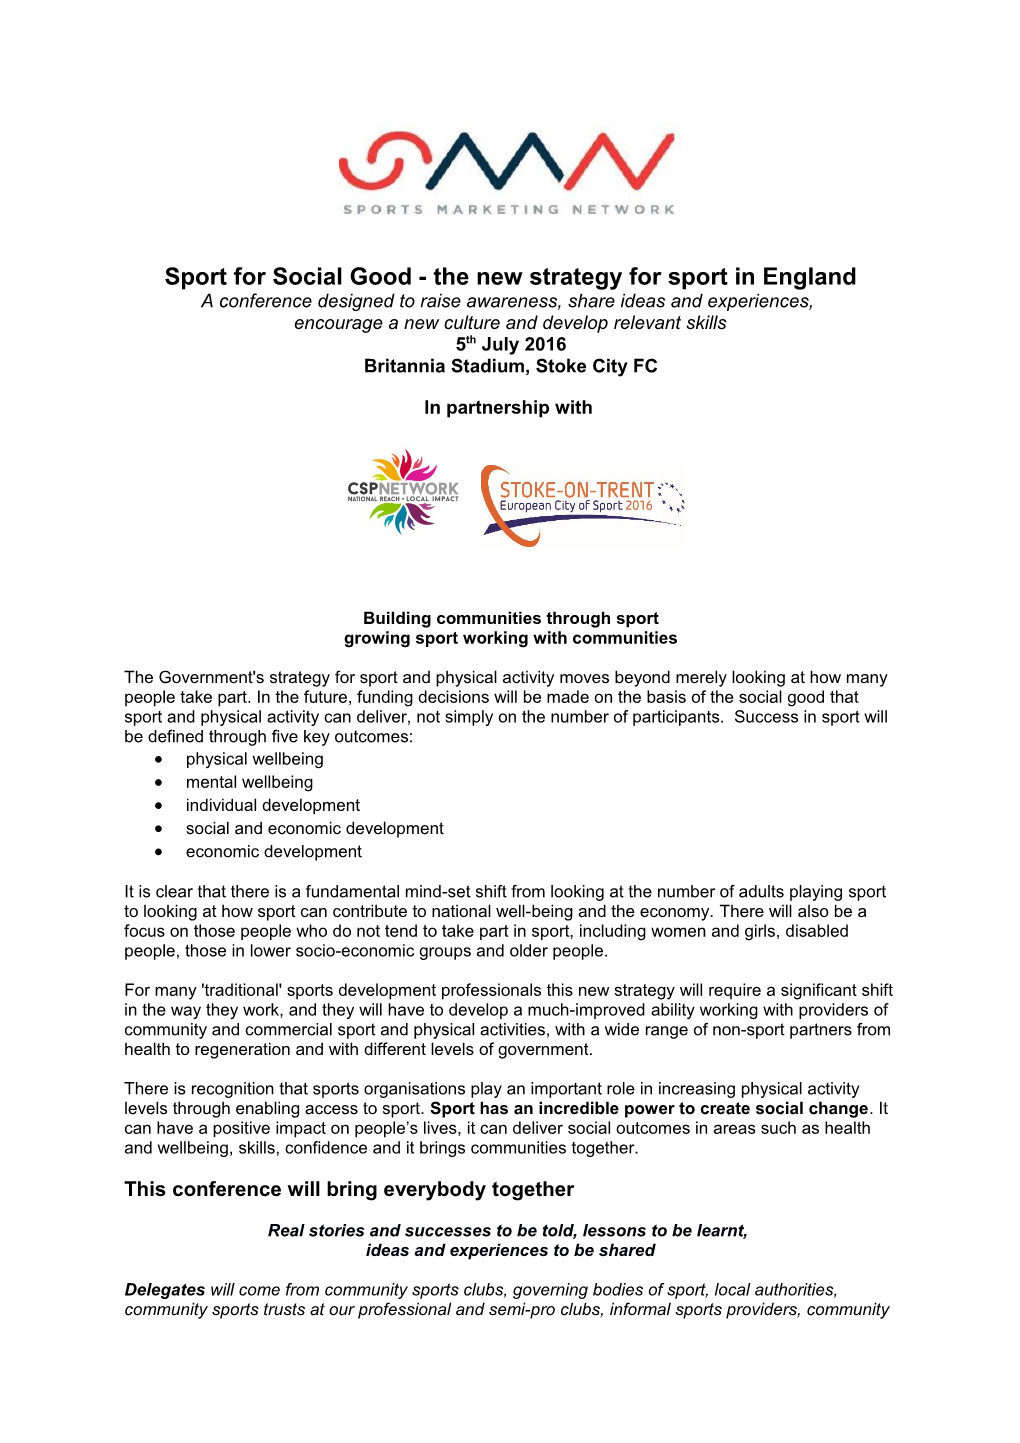 Sport for Social Good - the New Strategy for Sport in England